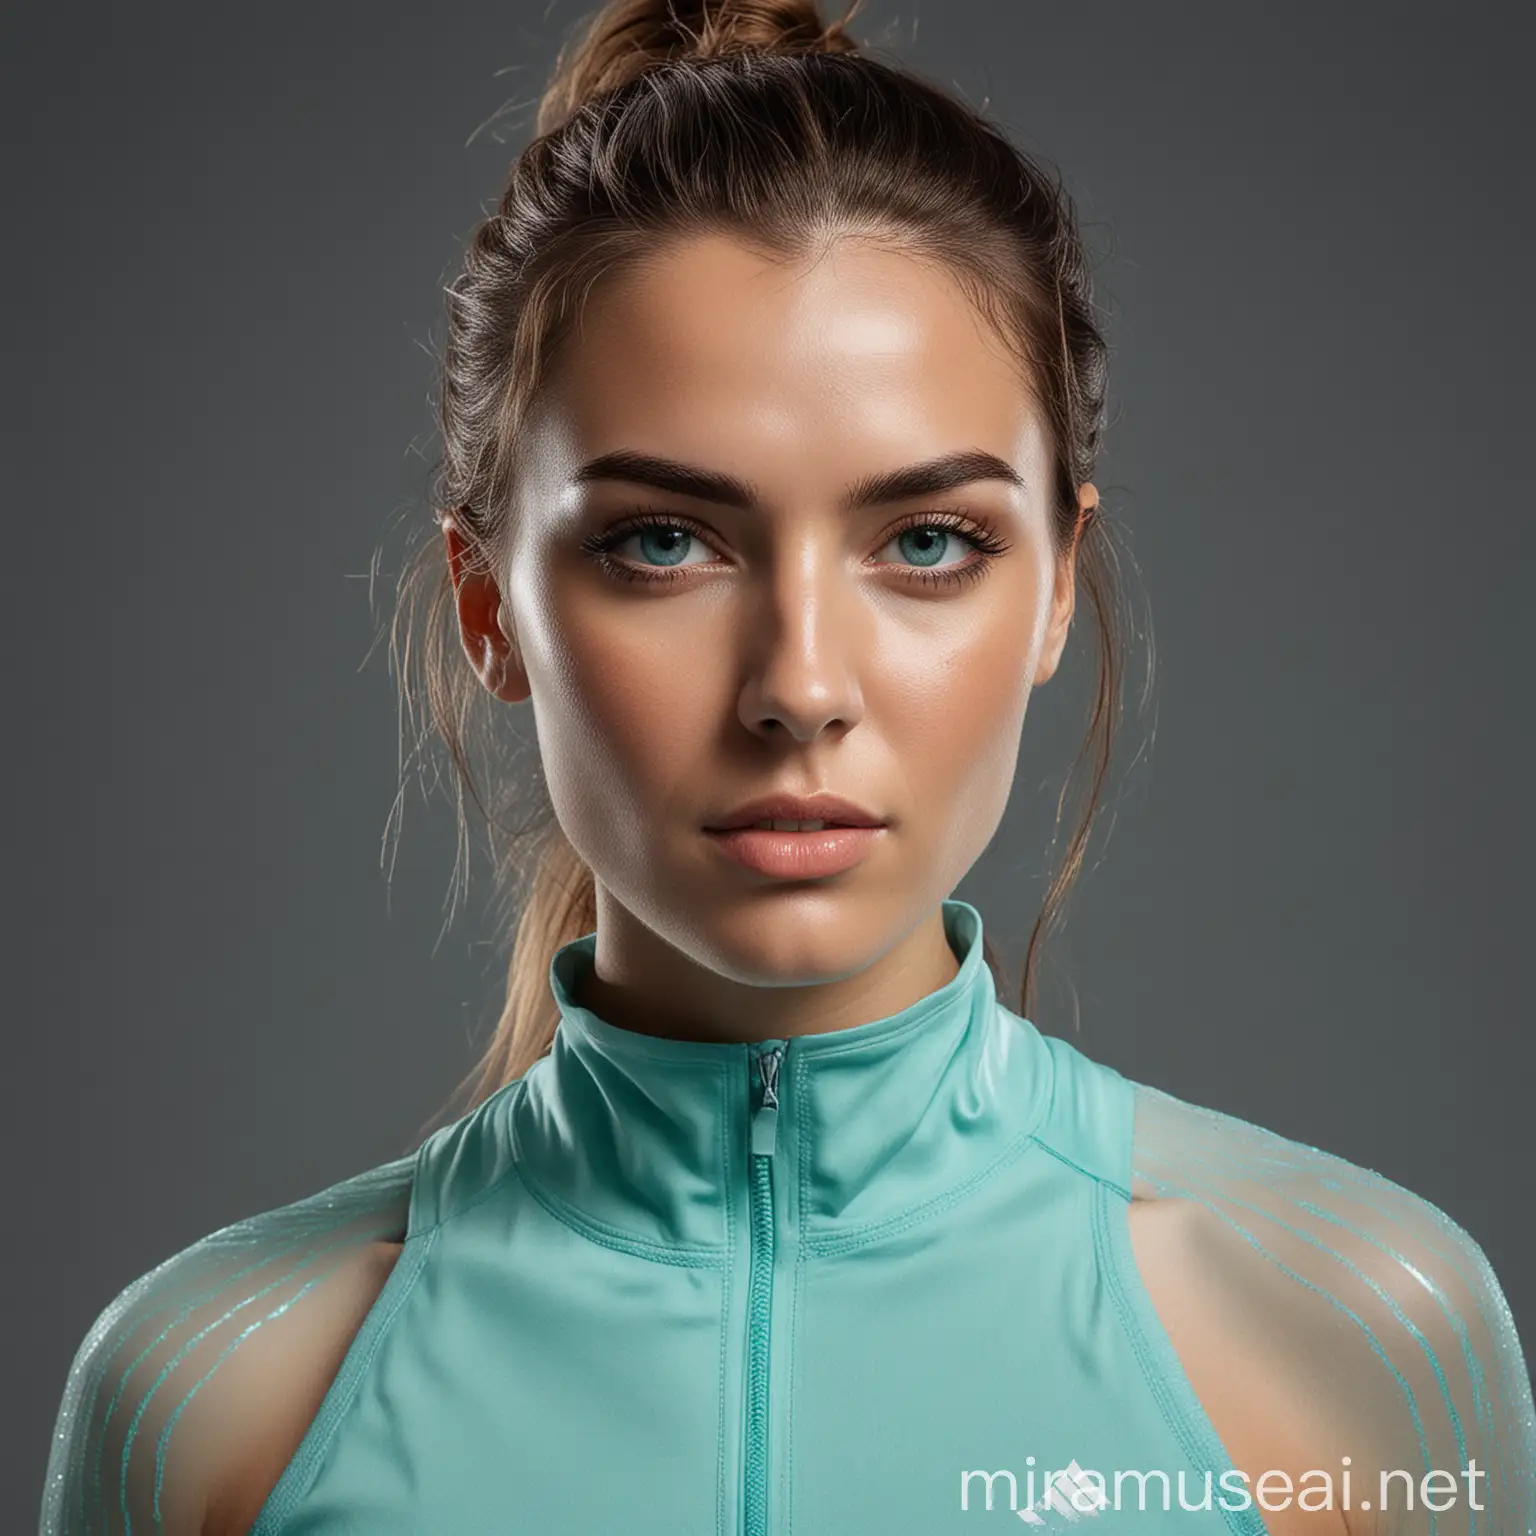 Attractive Woman in Radiant Turquoise Sportswear